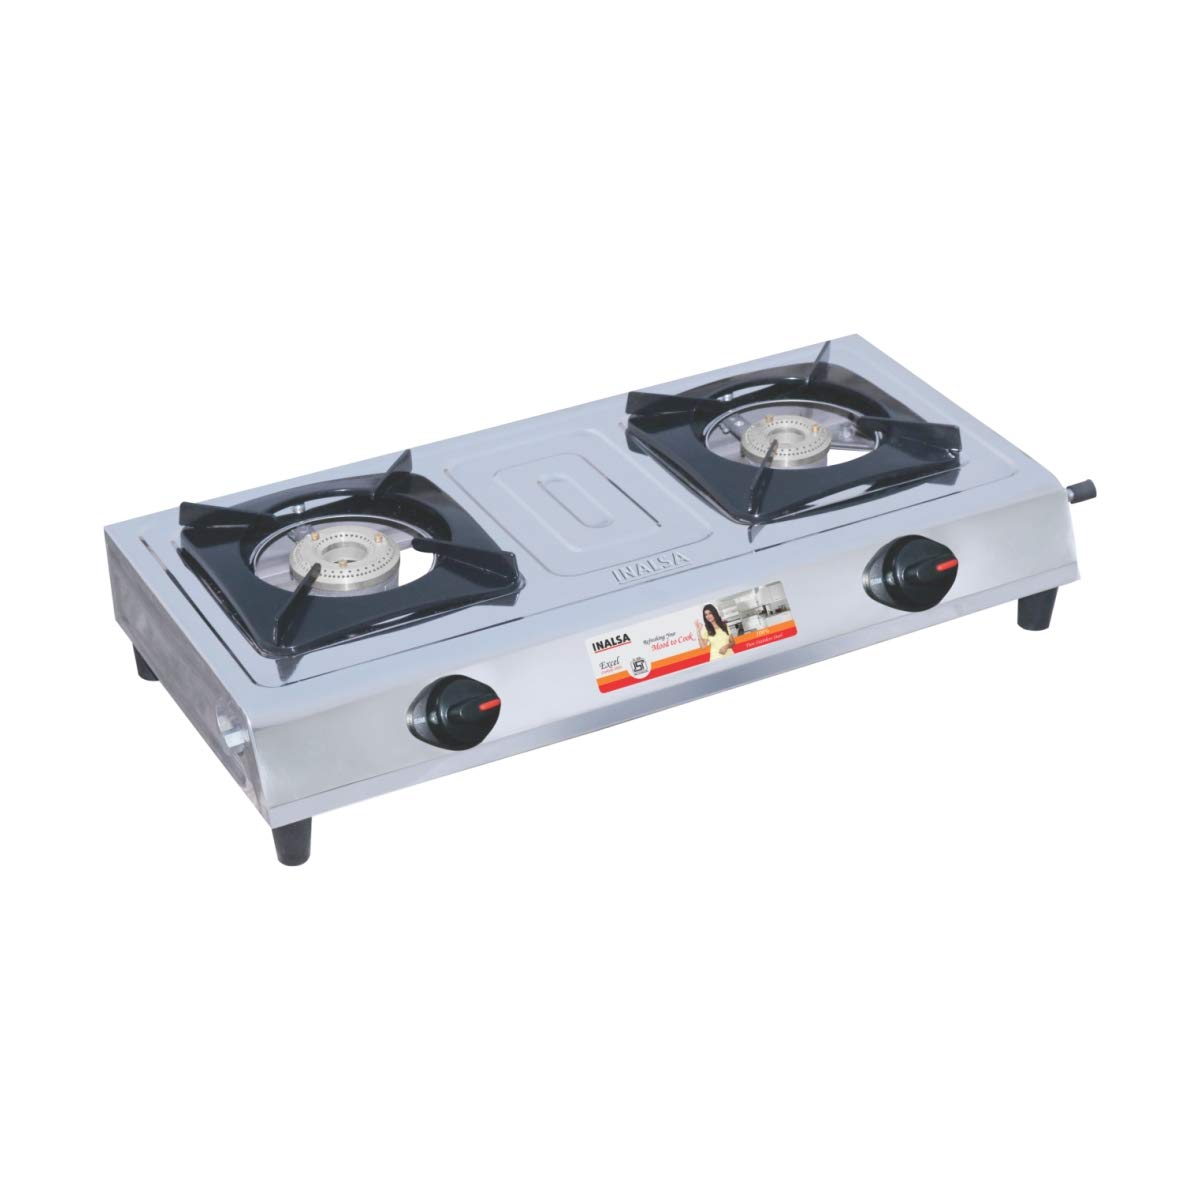 Inalsa Excel Stainless Steel 2 Burner Gas Stove